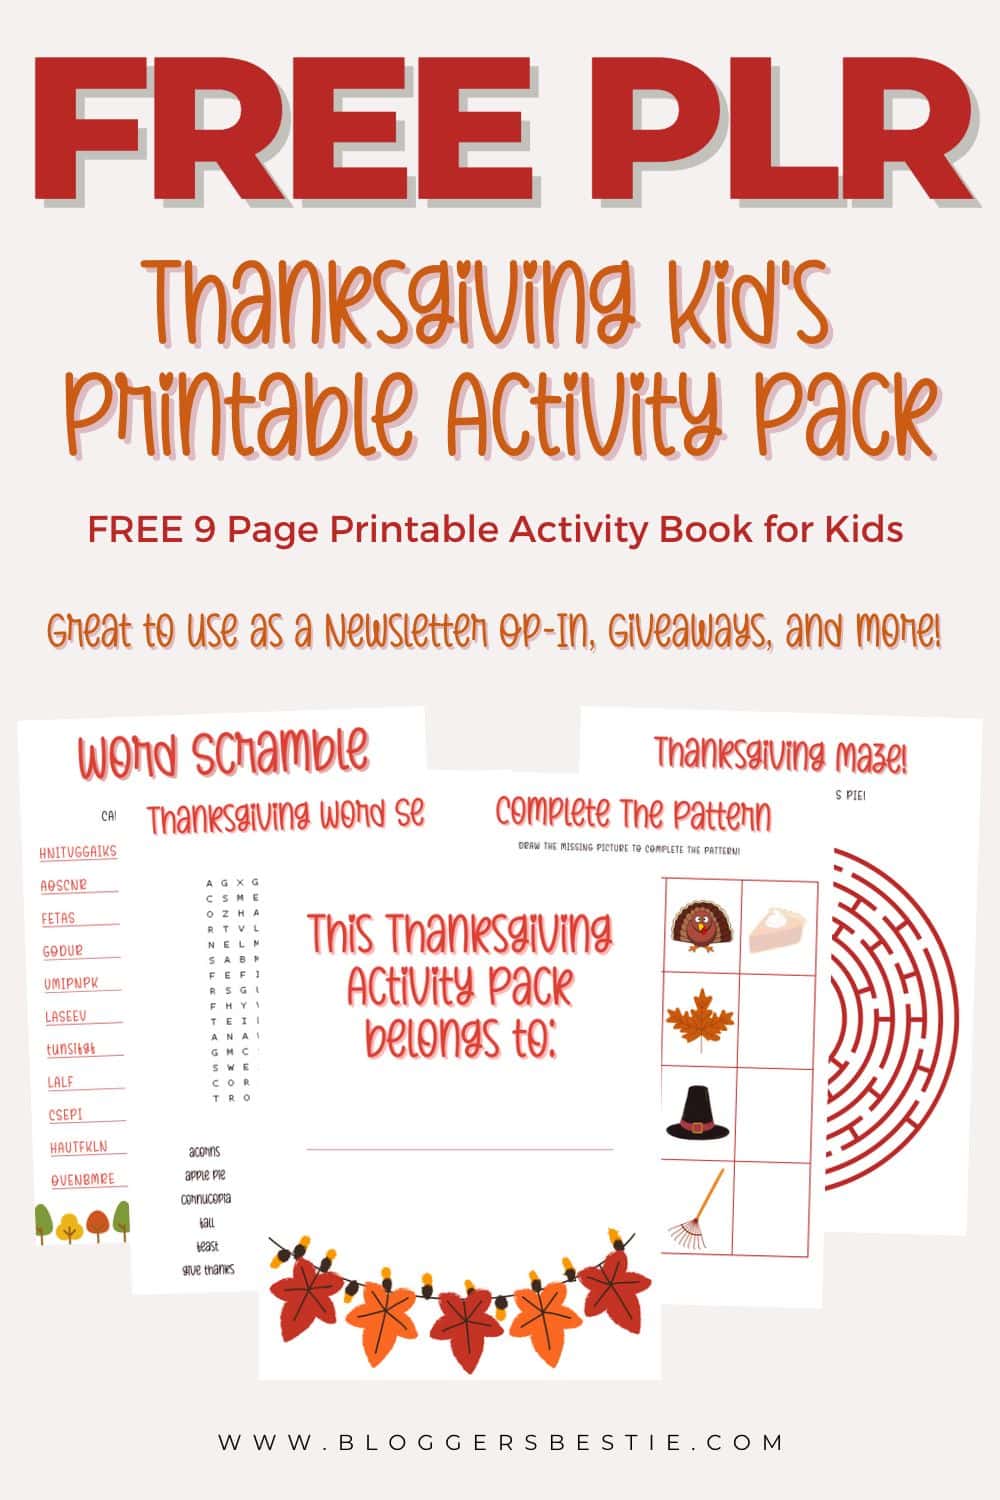 Kids Activity Guide (FREE Printable)